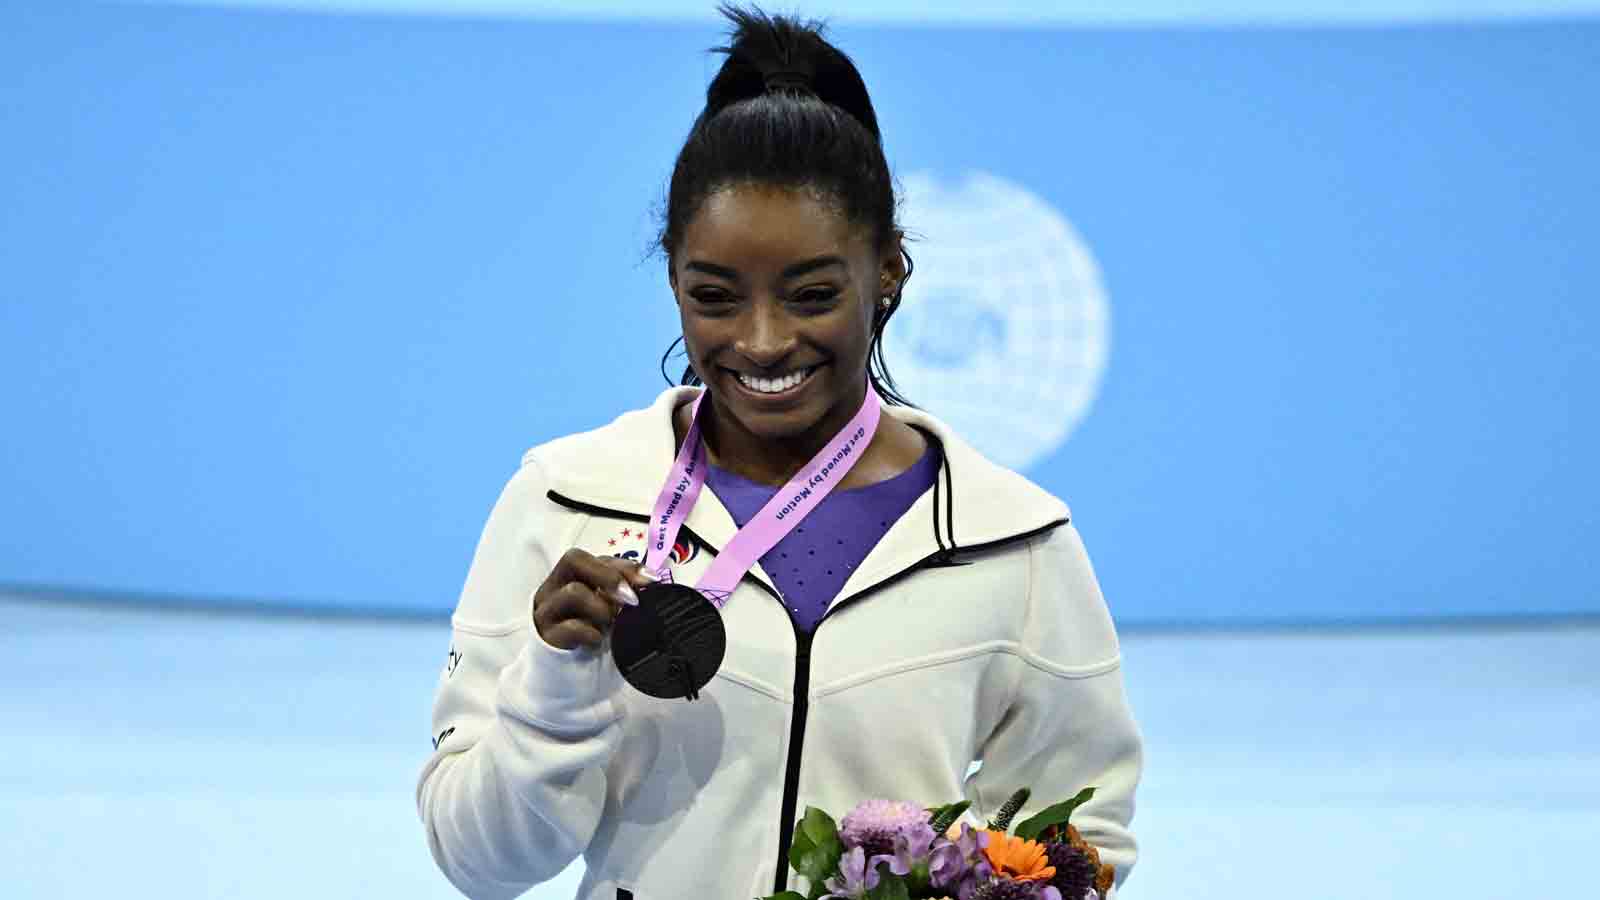 Simone Biles wins 6th world title, becomes most decorated gymnast